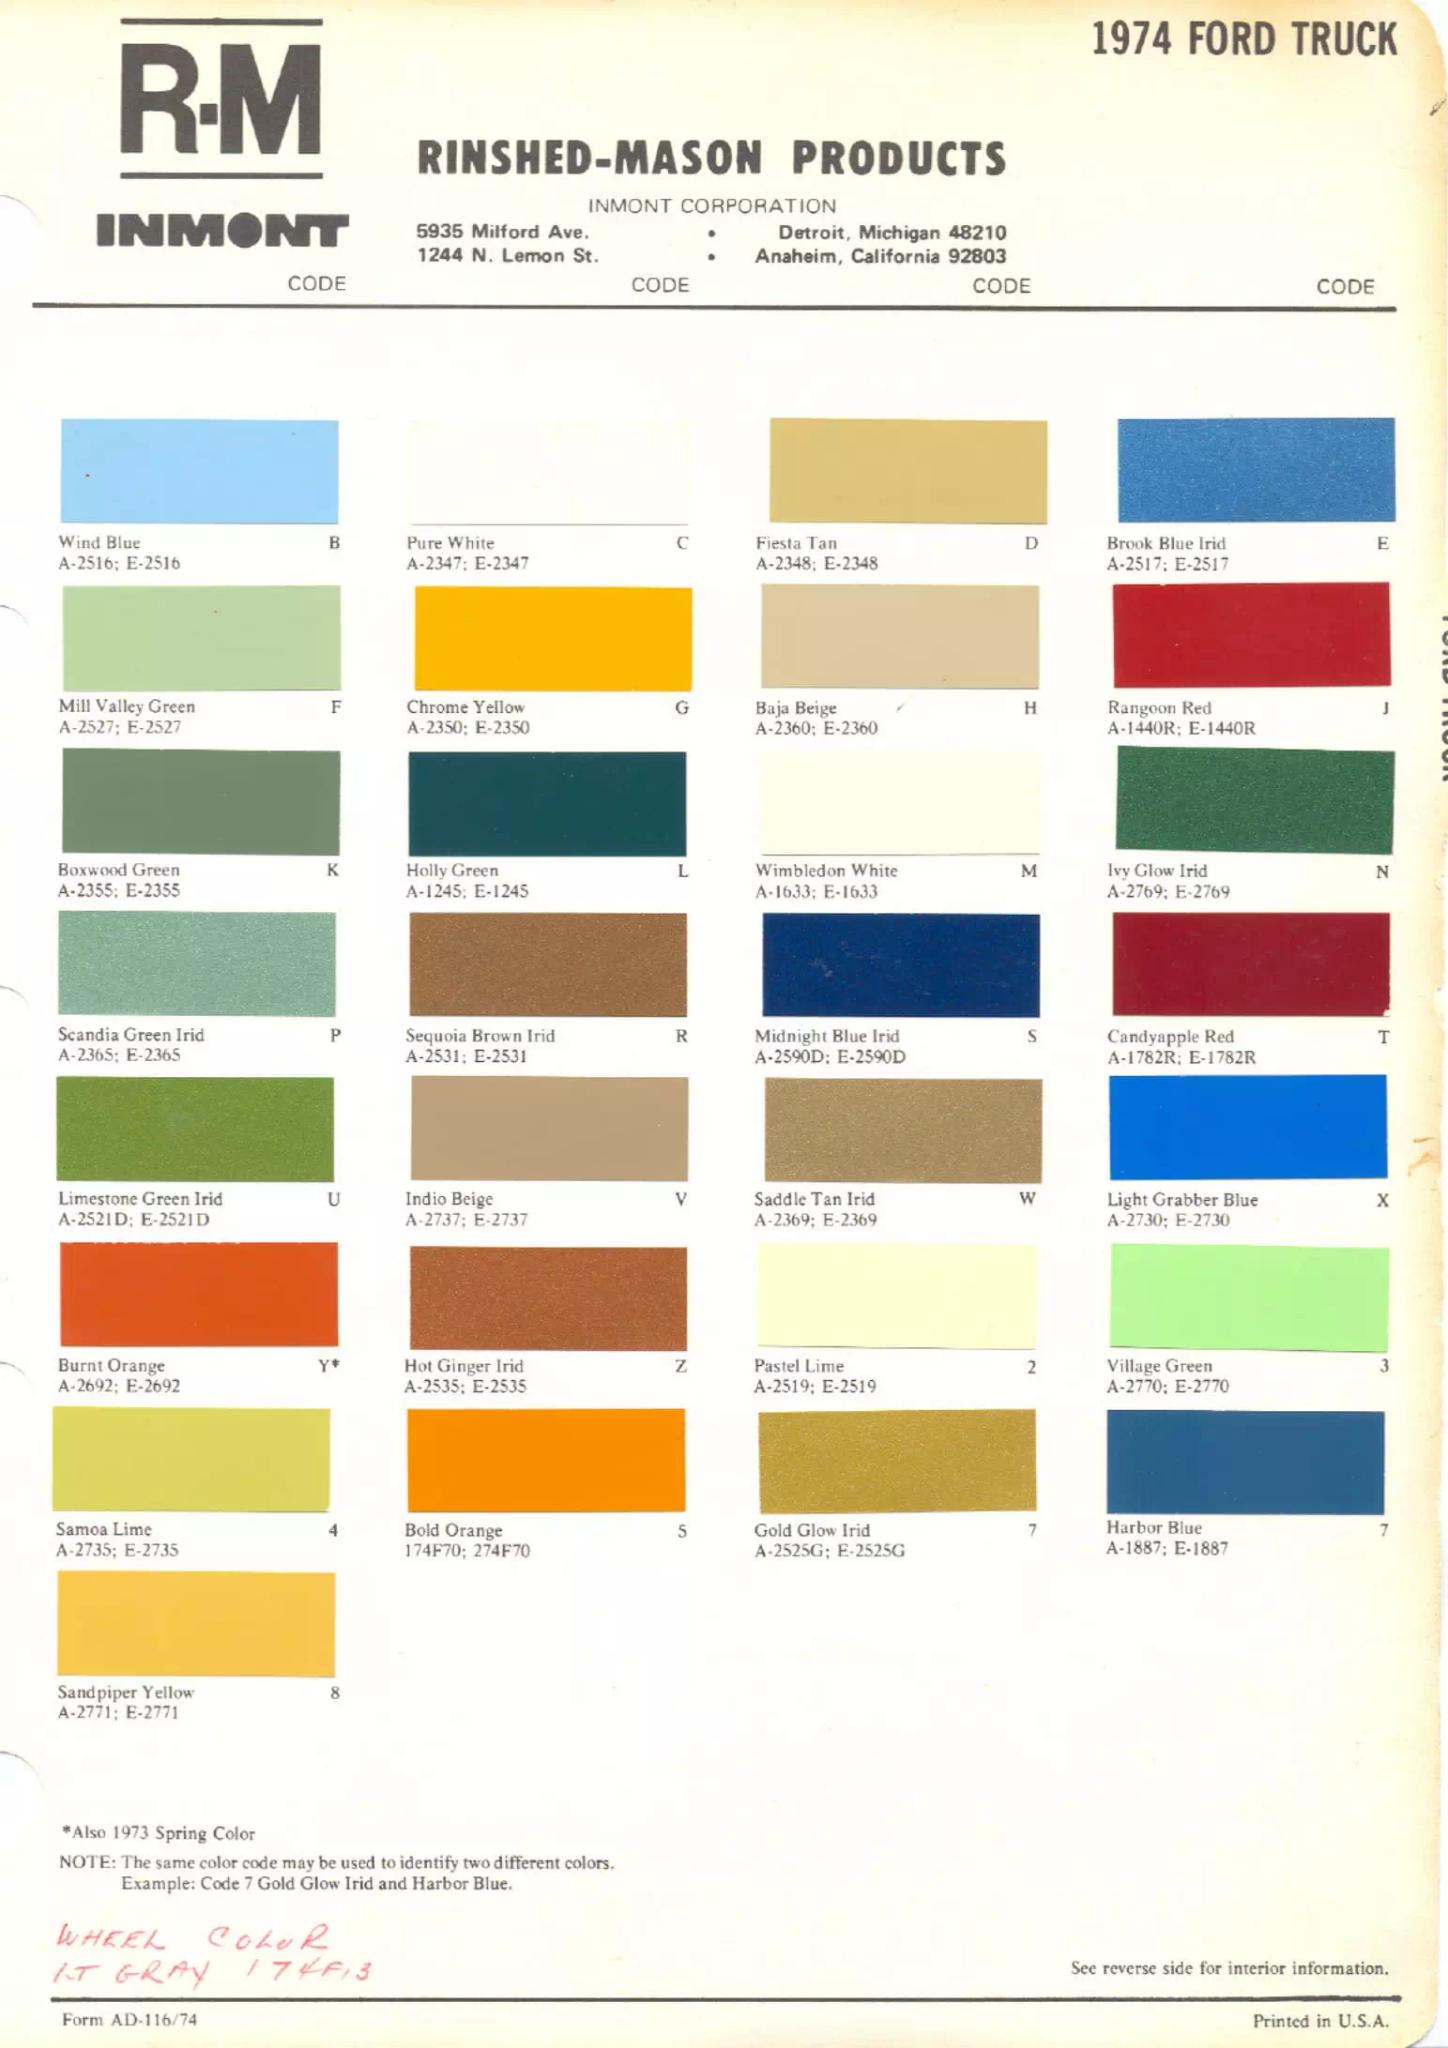 color codes, color examples and ordering codes for the vehicle